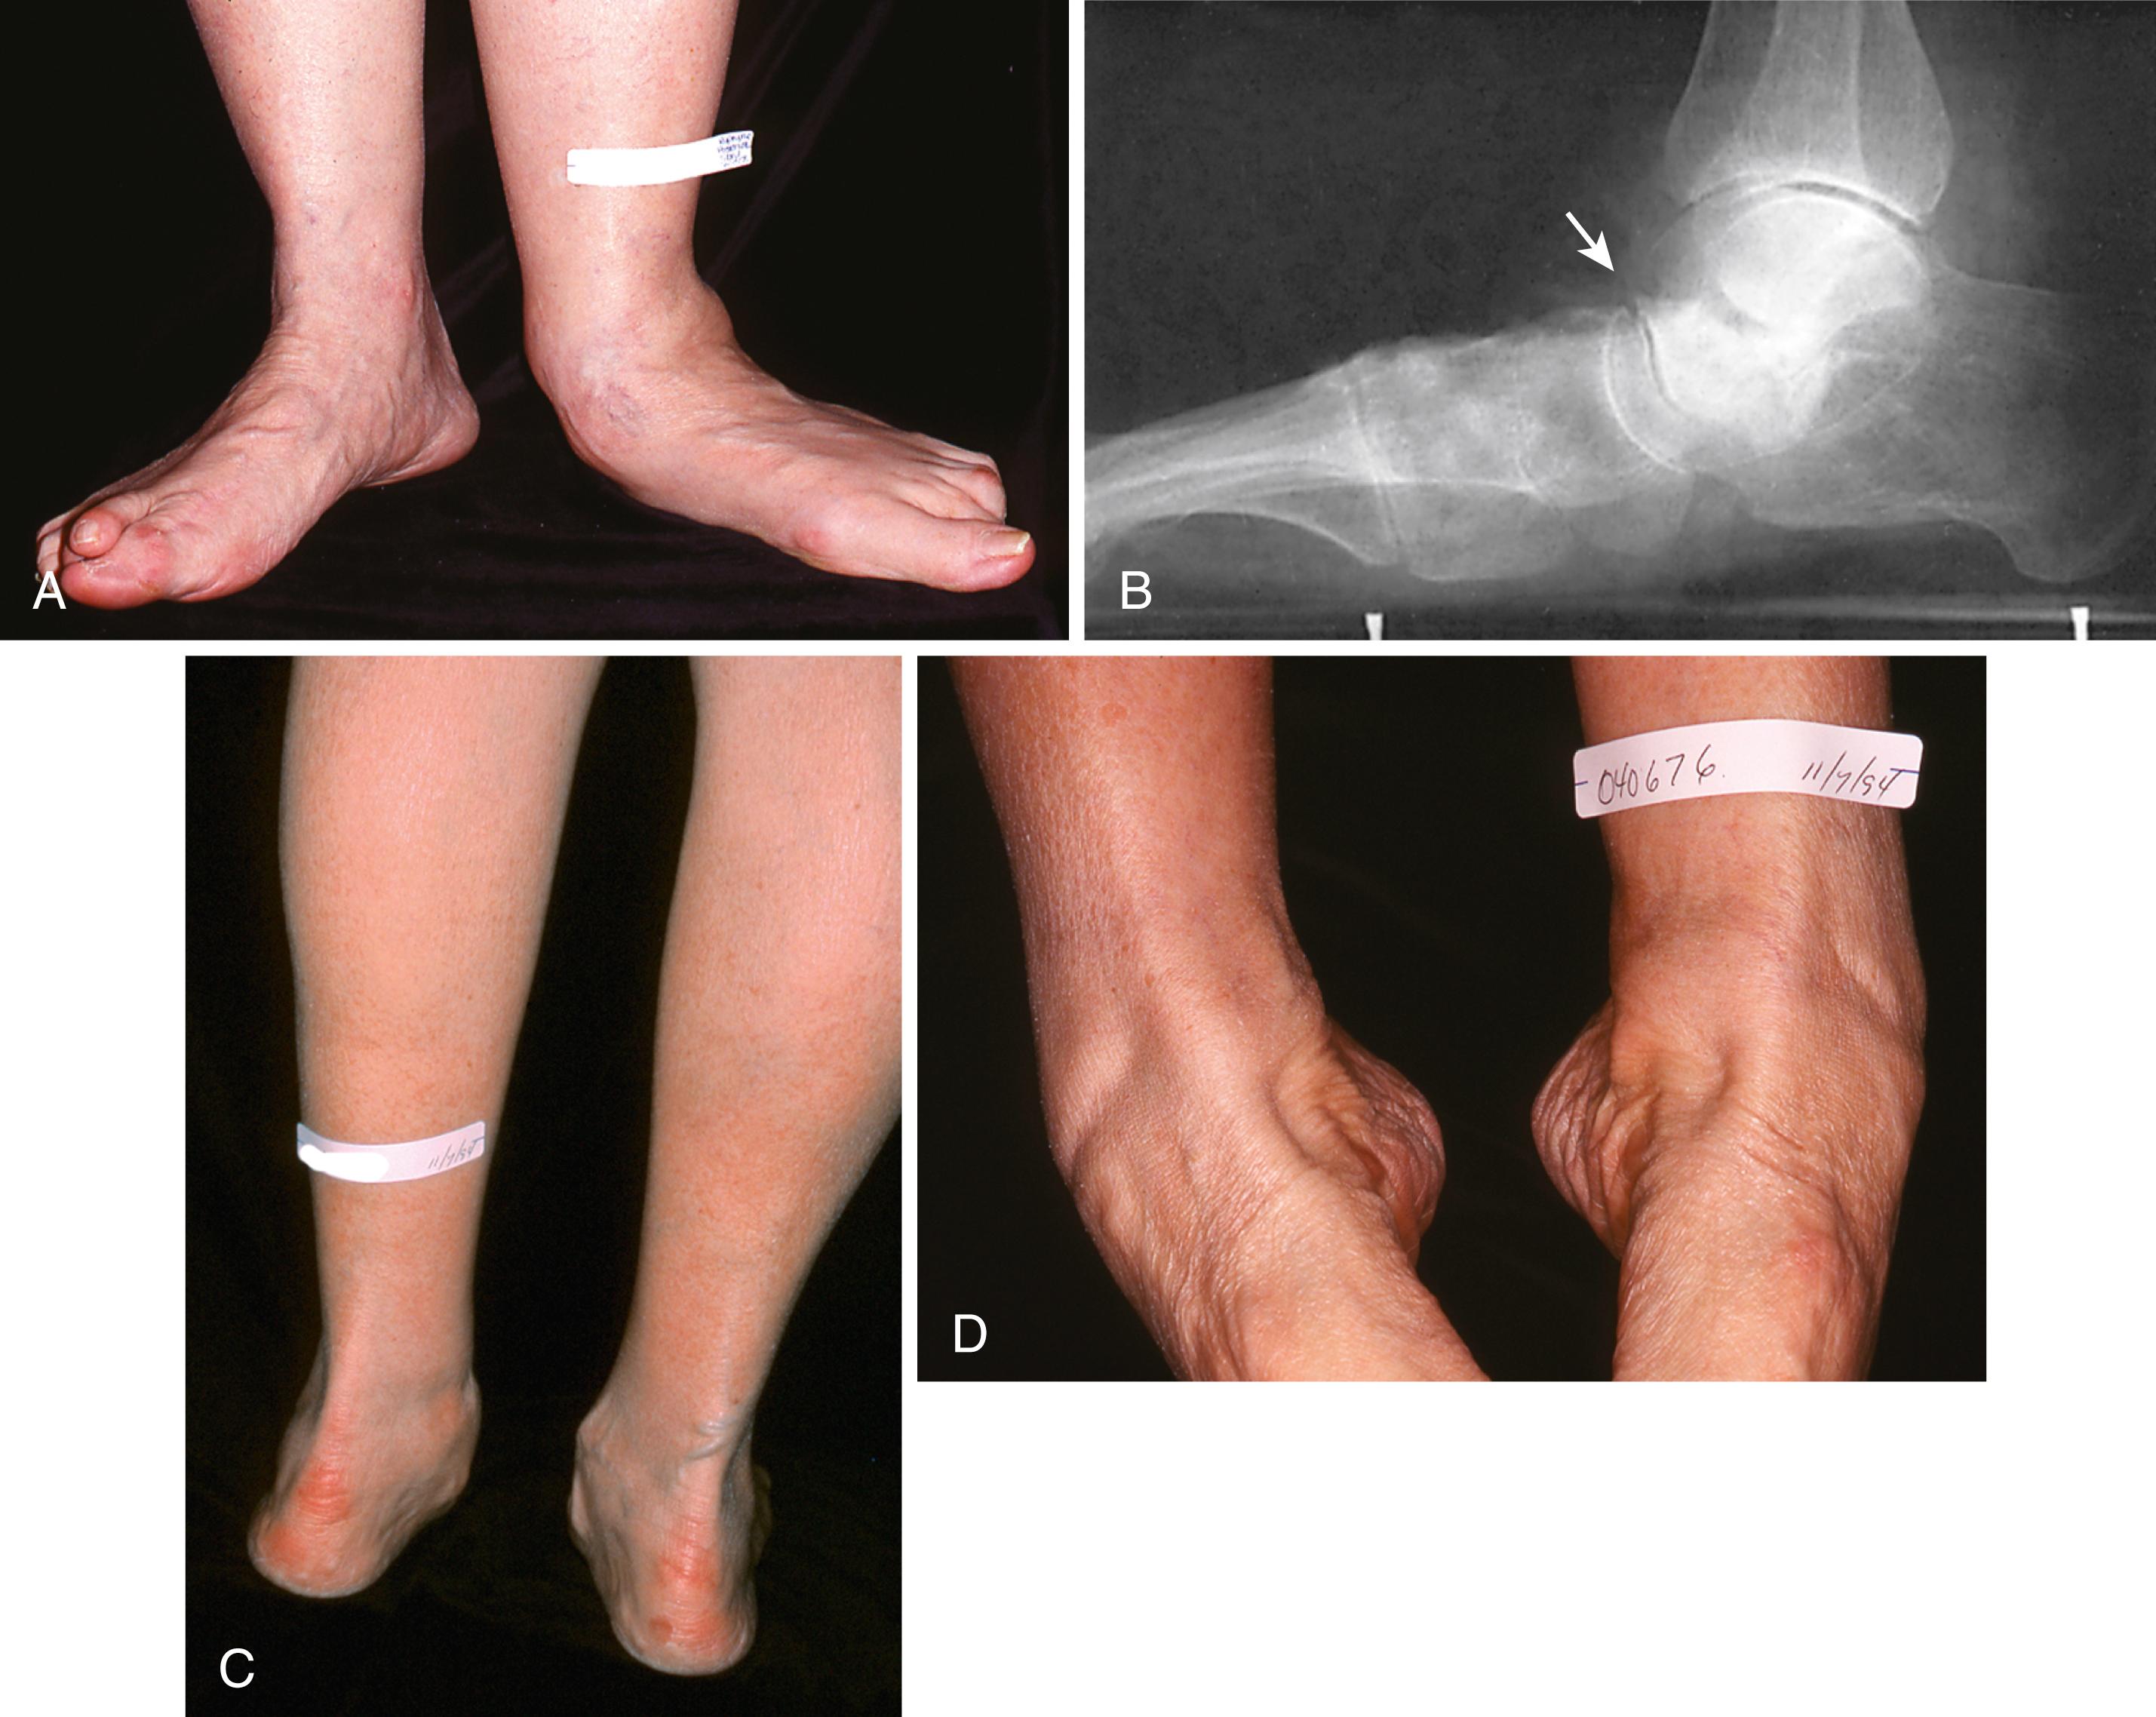 FIGURE 83.1, A, Patient with asymmetric pes planus. B, Talus slides distally, medially, and plantarward with loss of posterior tibial tendon and probable insufficiency of plantar calcaneonavicular ligament. C, Long-standing deformity. Achilles tendon contracture exacerbates heel valgus. D, In sitting position, when asked to hold foot in plantarflexion-inversion after being placed there passively by examiner, patient unconsciously used anterior tibial tendon. Also note increased supination (forefoot varus relative to longitudinal axis of calcaneus).